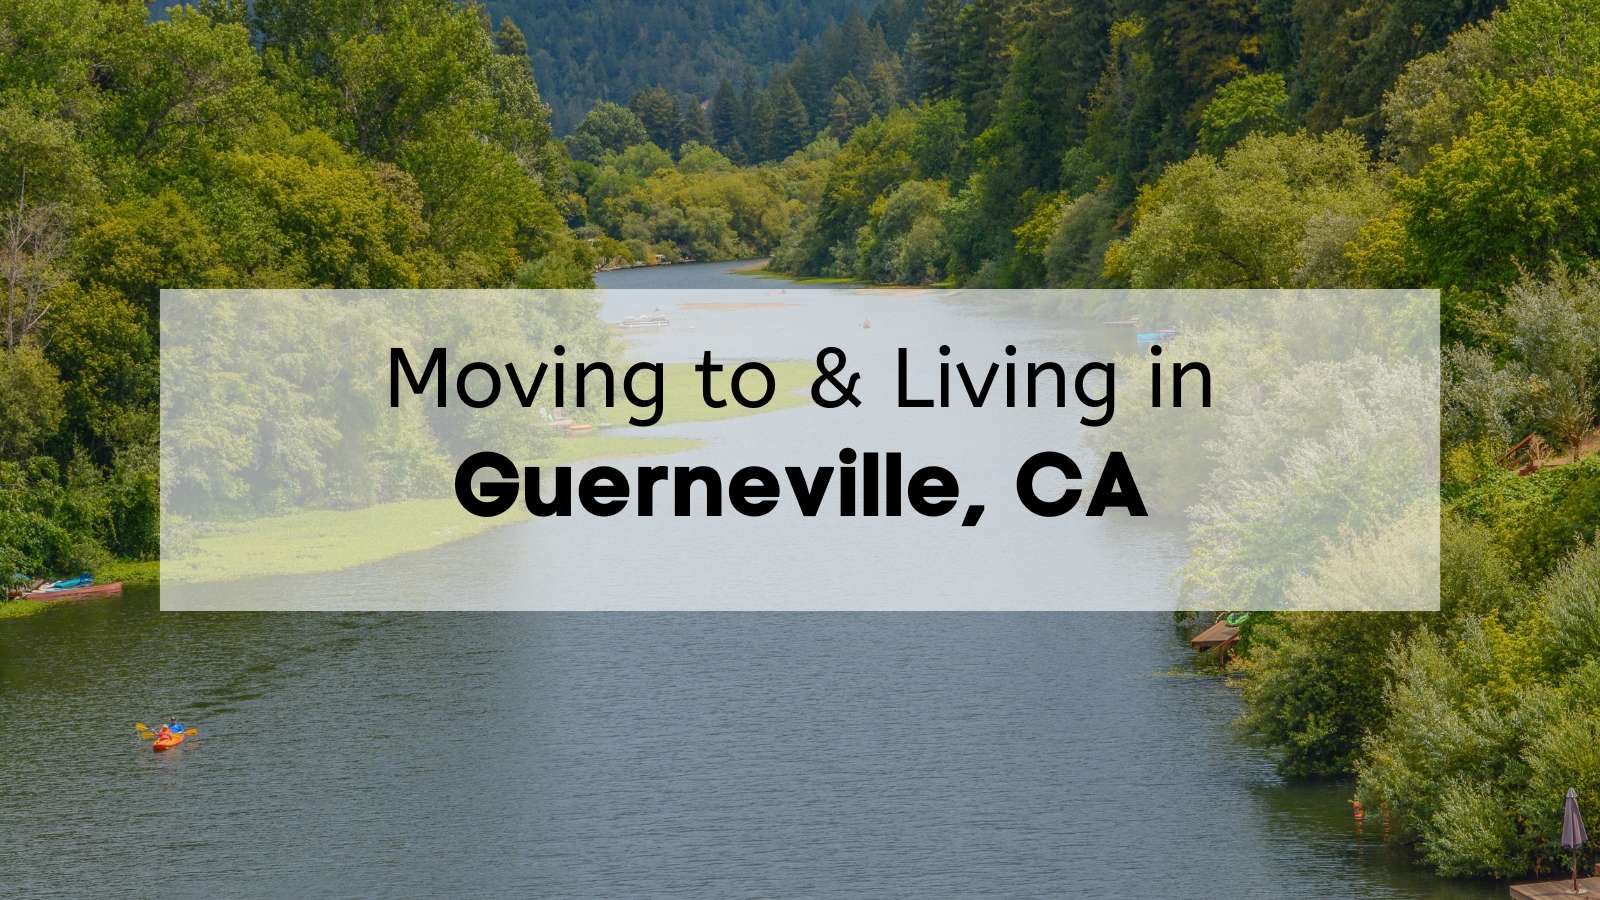 Moving to & Living in Guerneville, CA